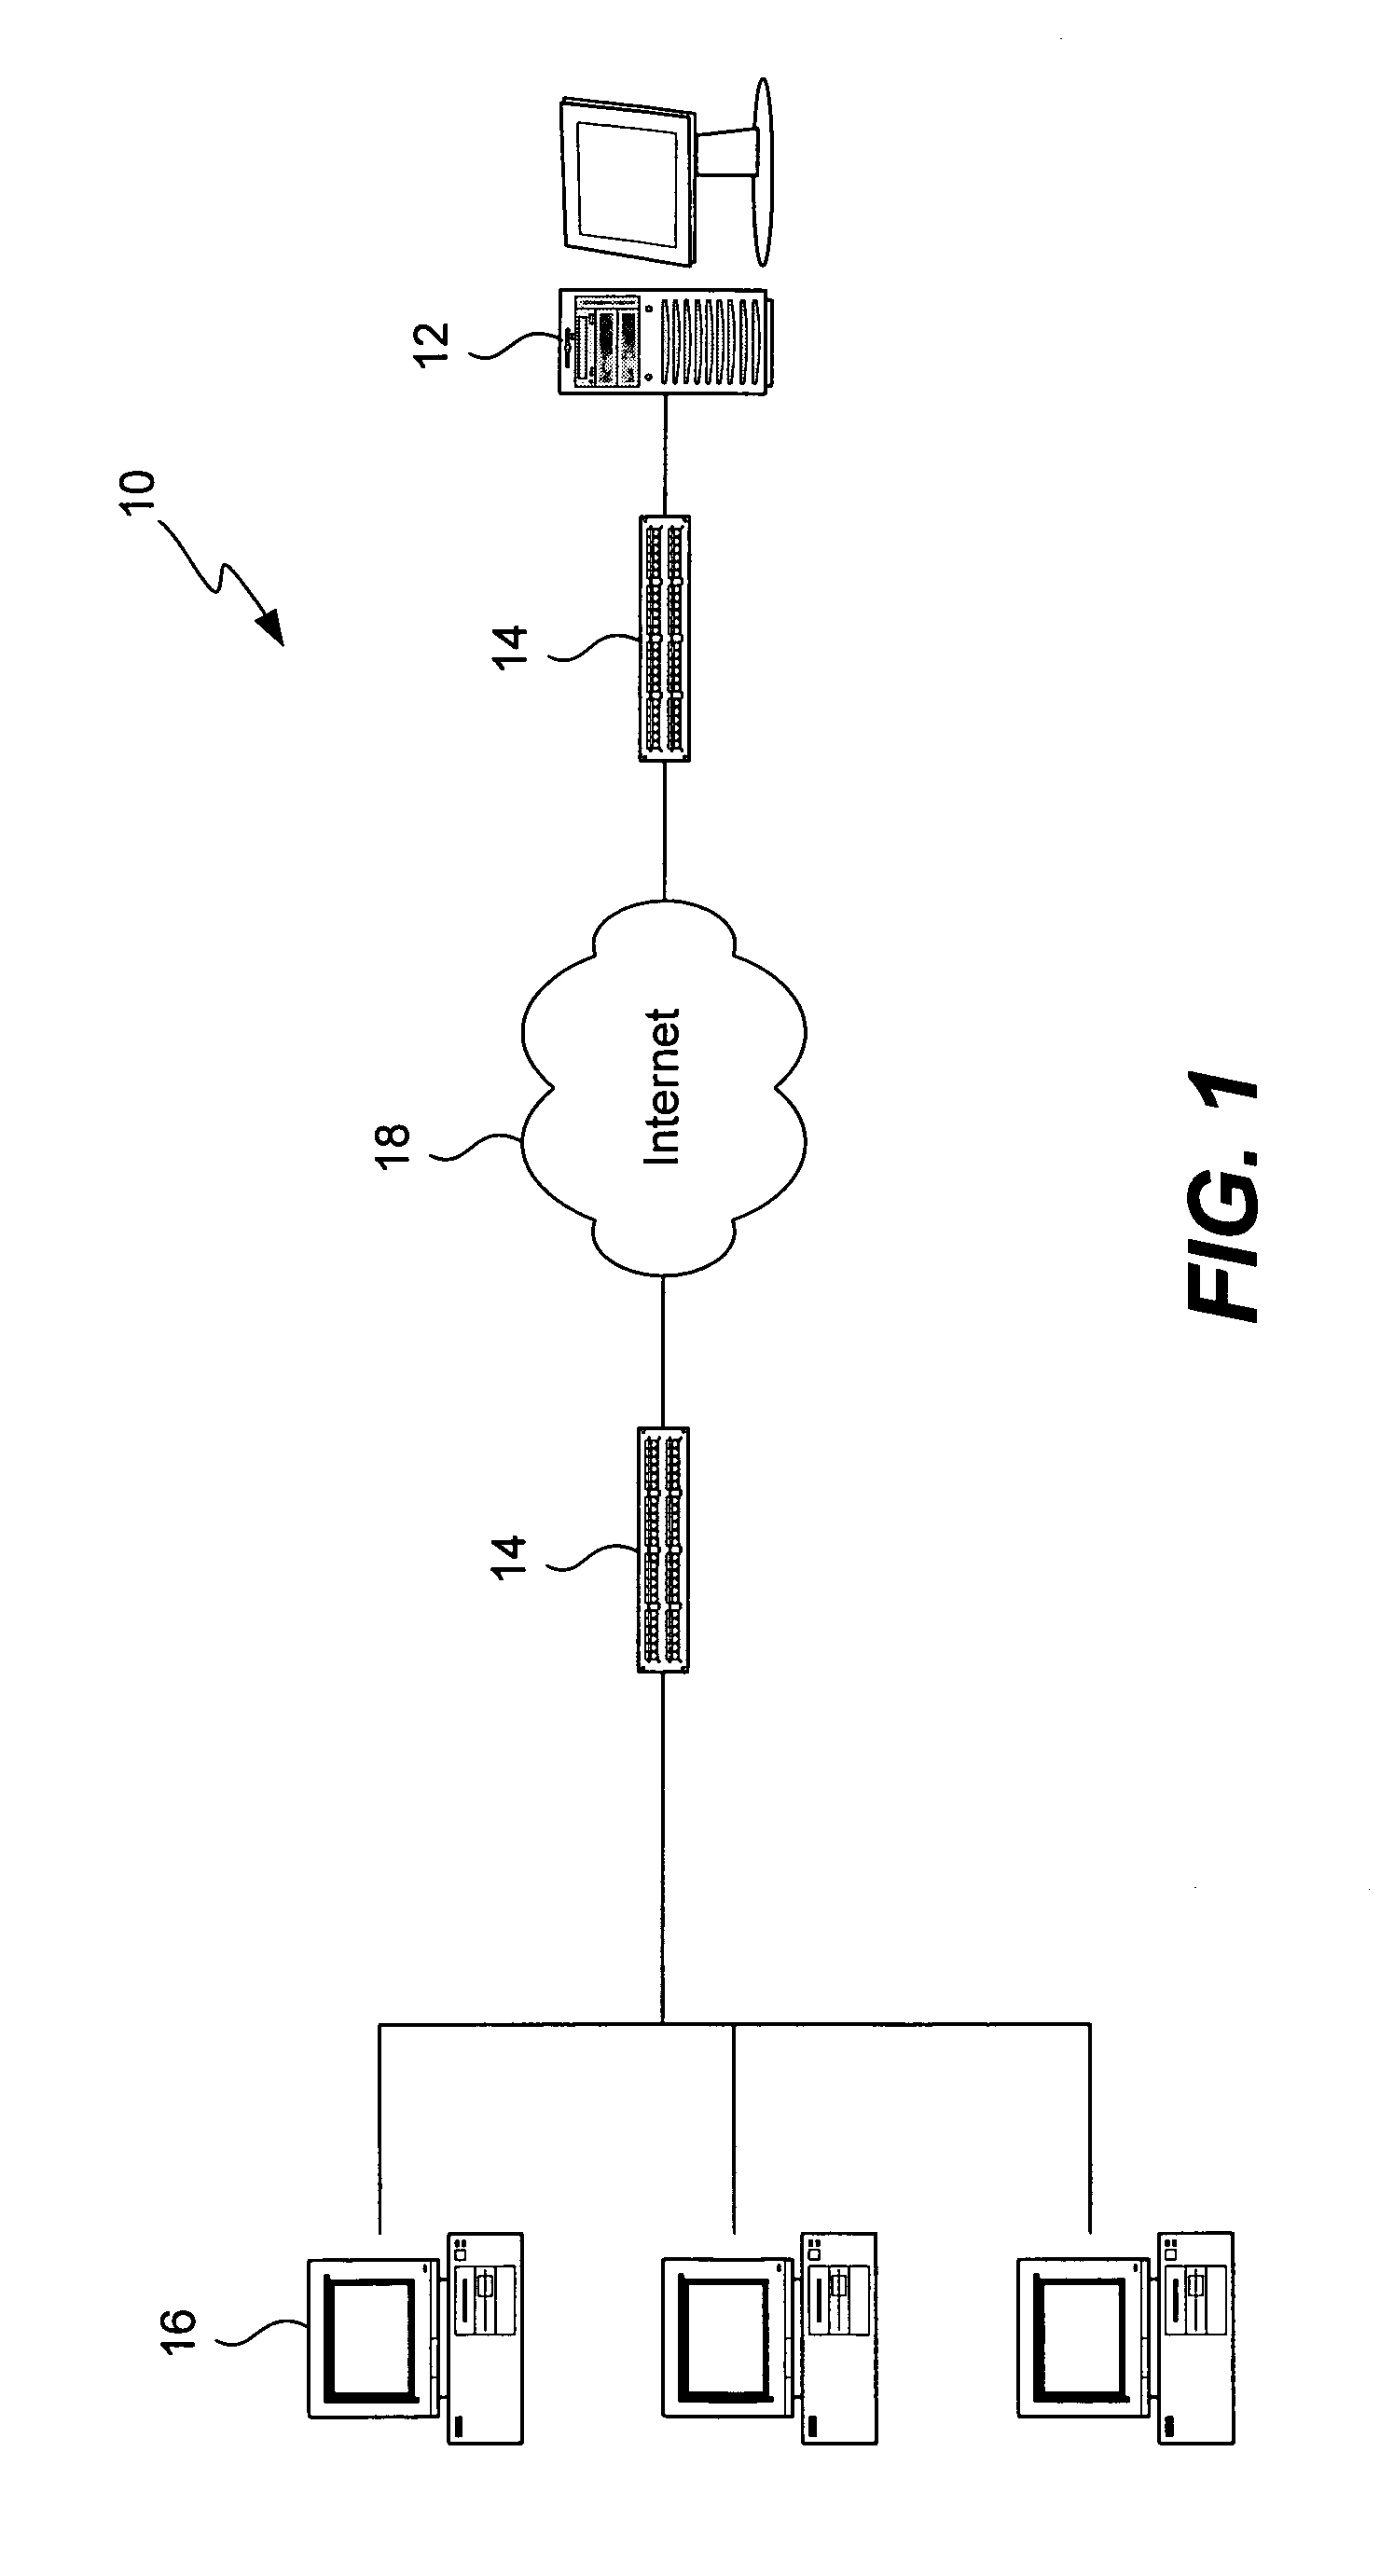 Apparatus and method for an internet based computer reservation booking system